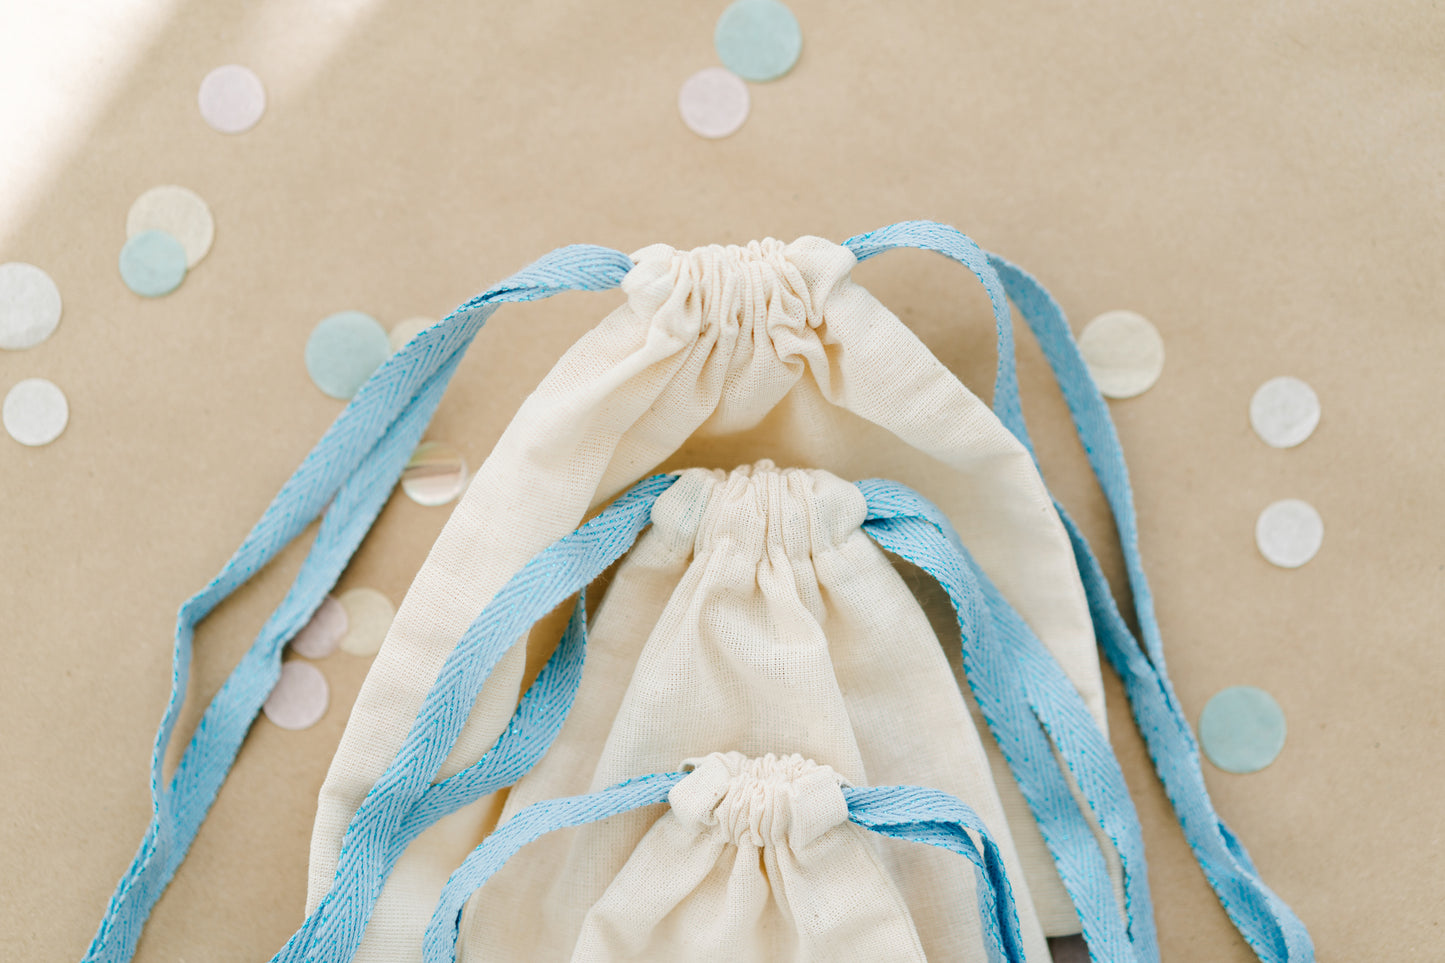 Baby's Clothing Bags with Drawstrings